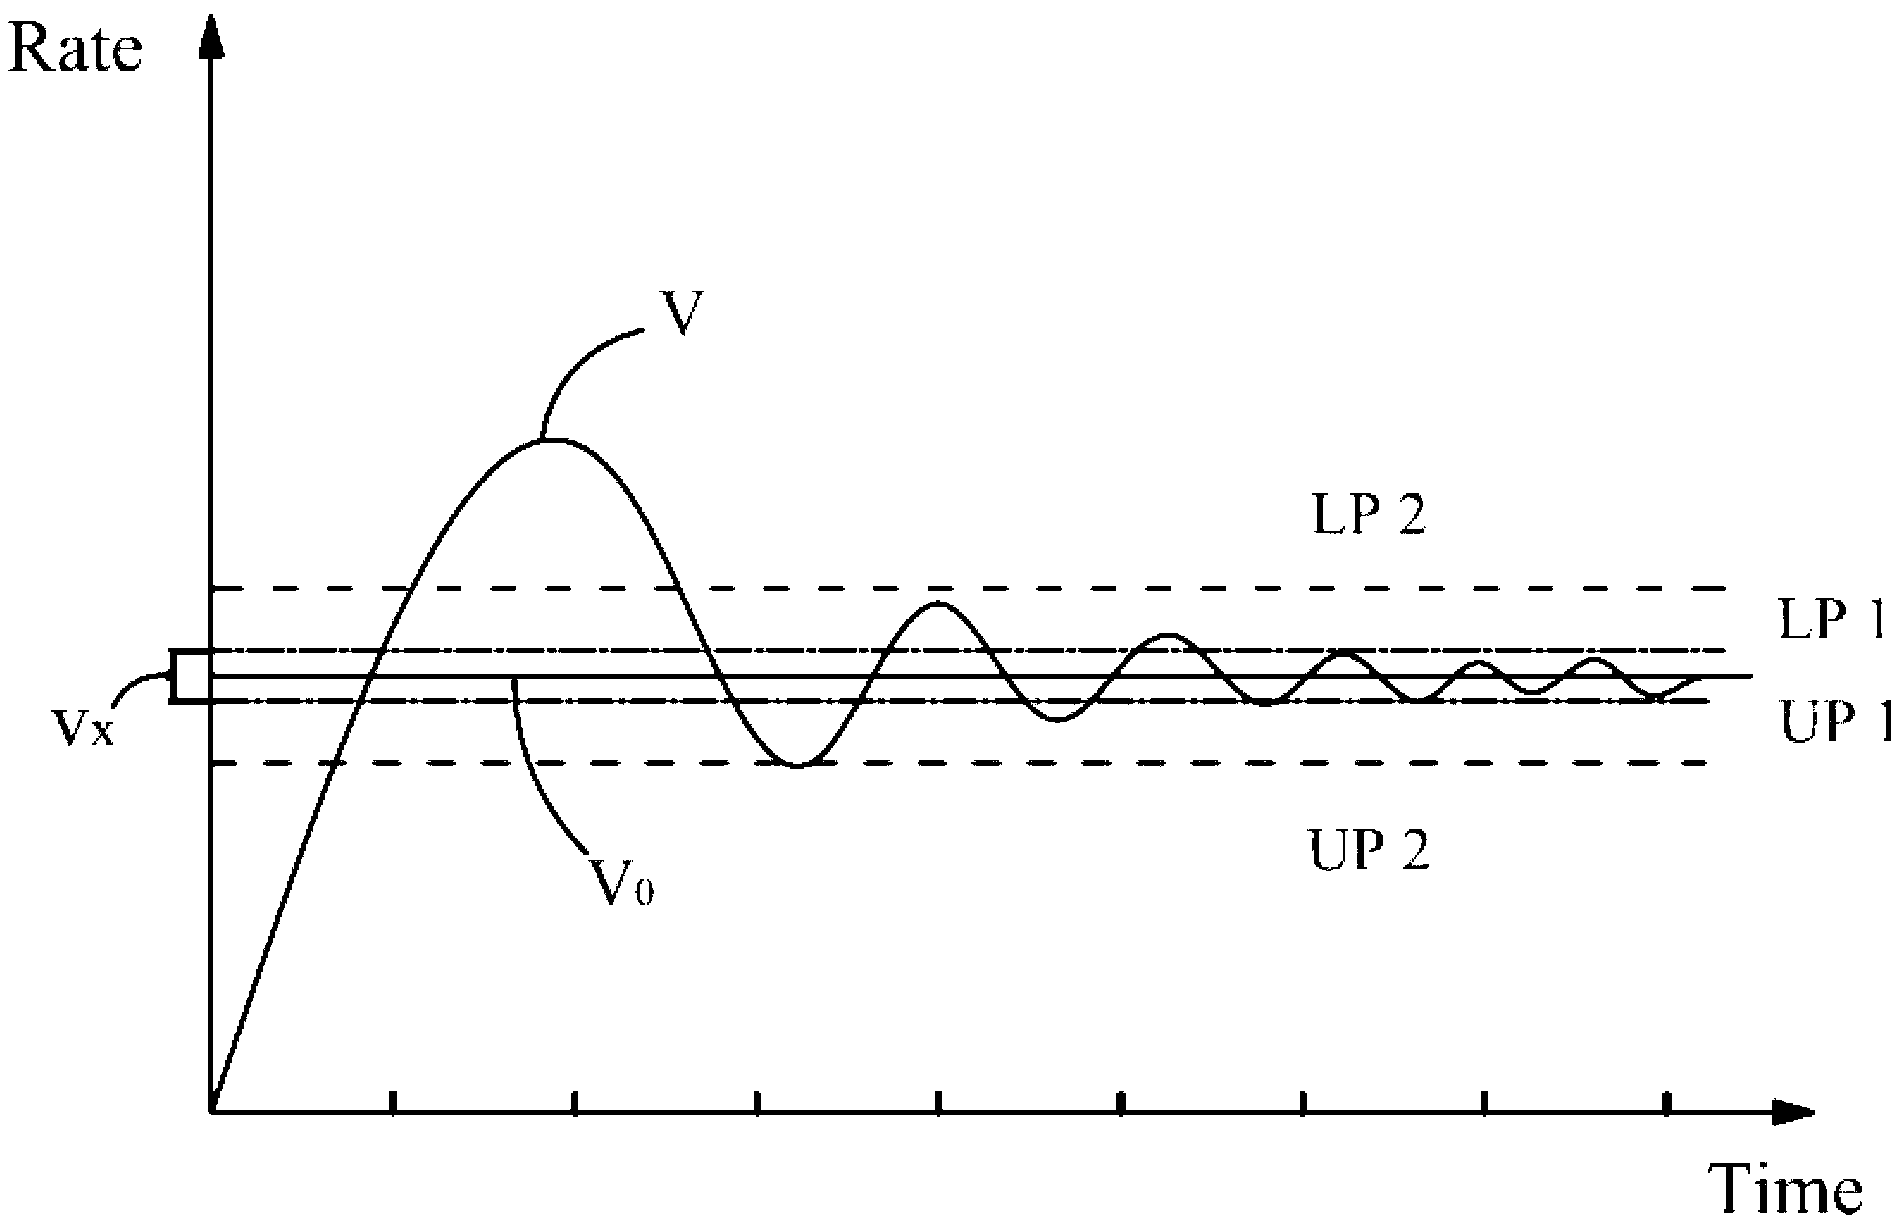 Temperature control system-based evaporation temperature control method for OLED (Organic Light Emitting Diode) organic layer